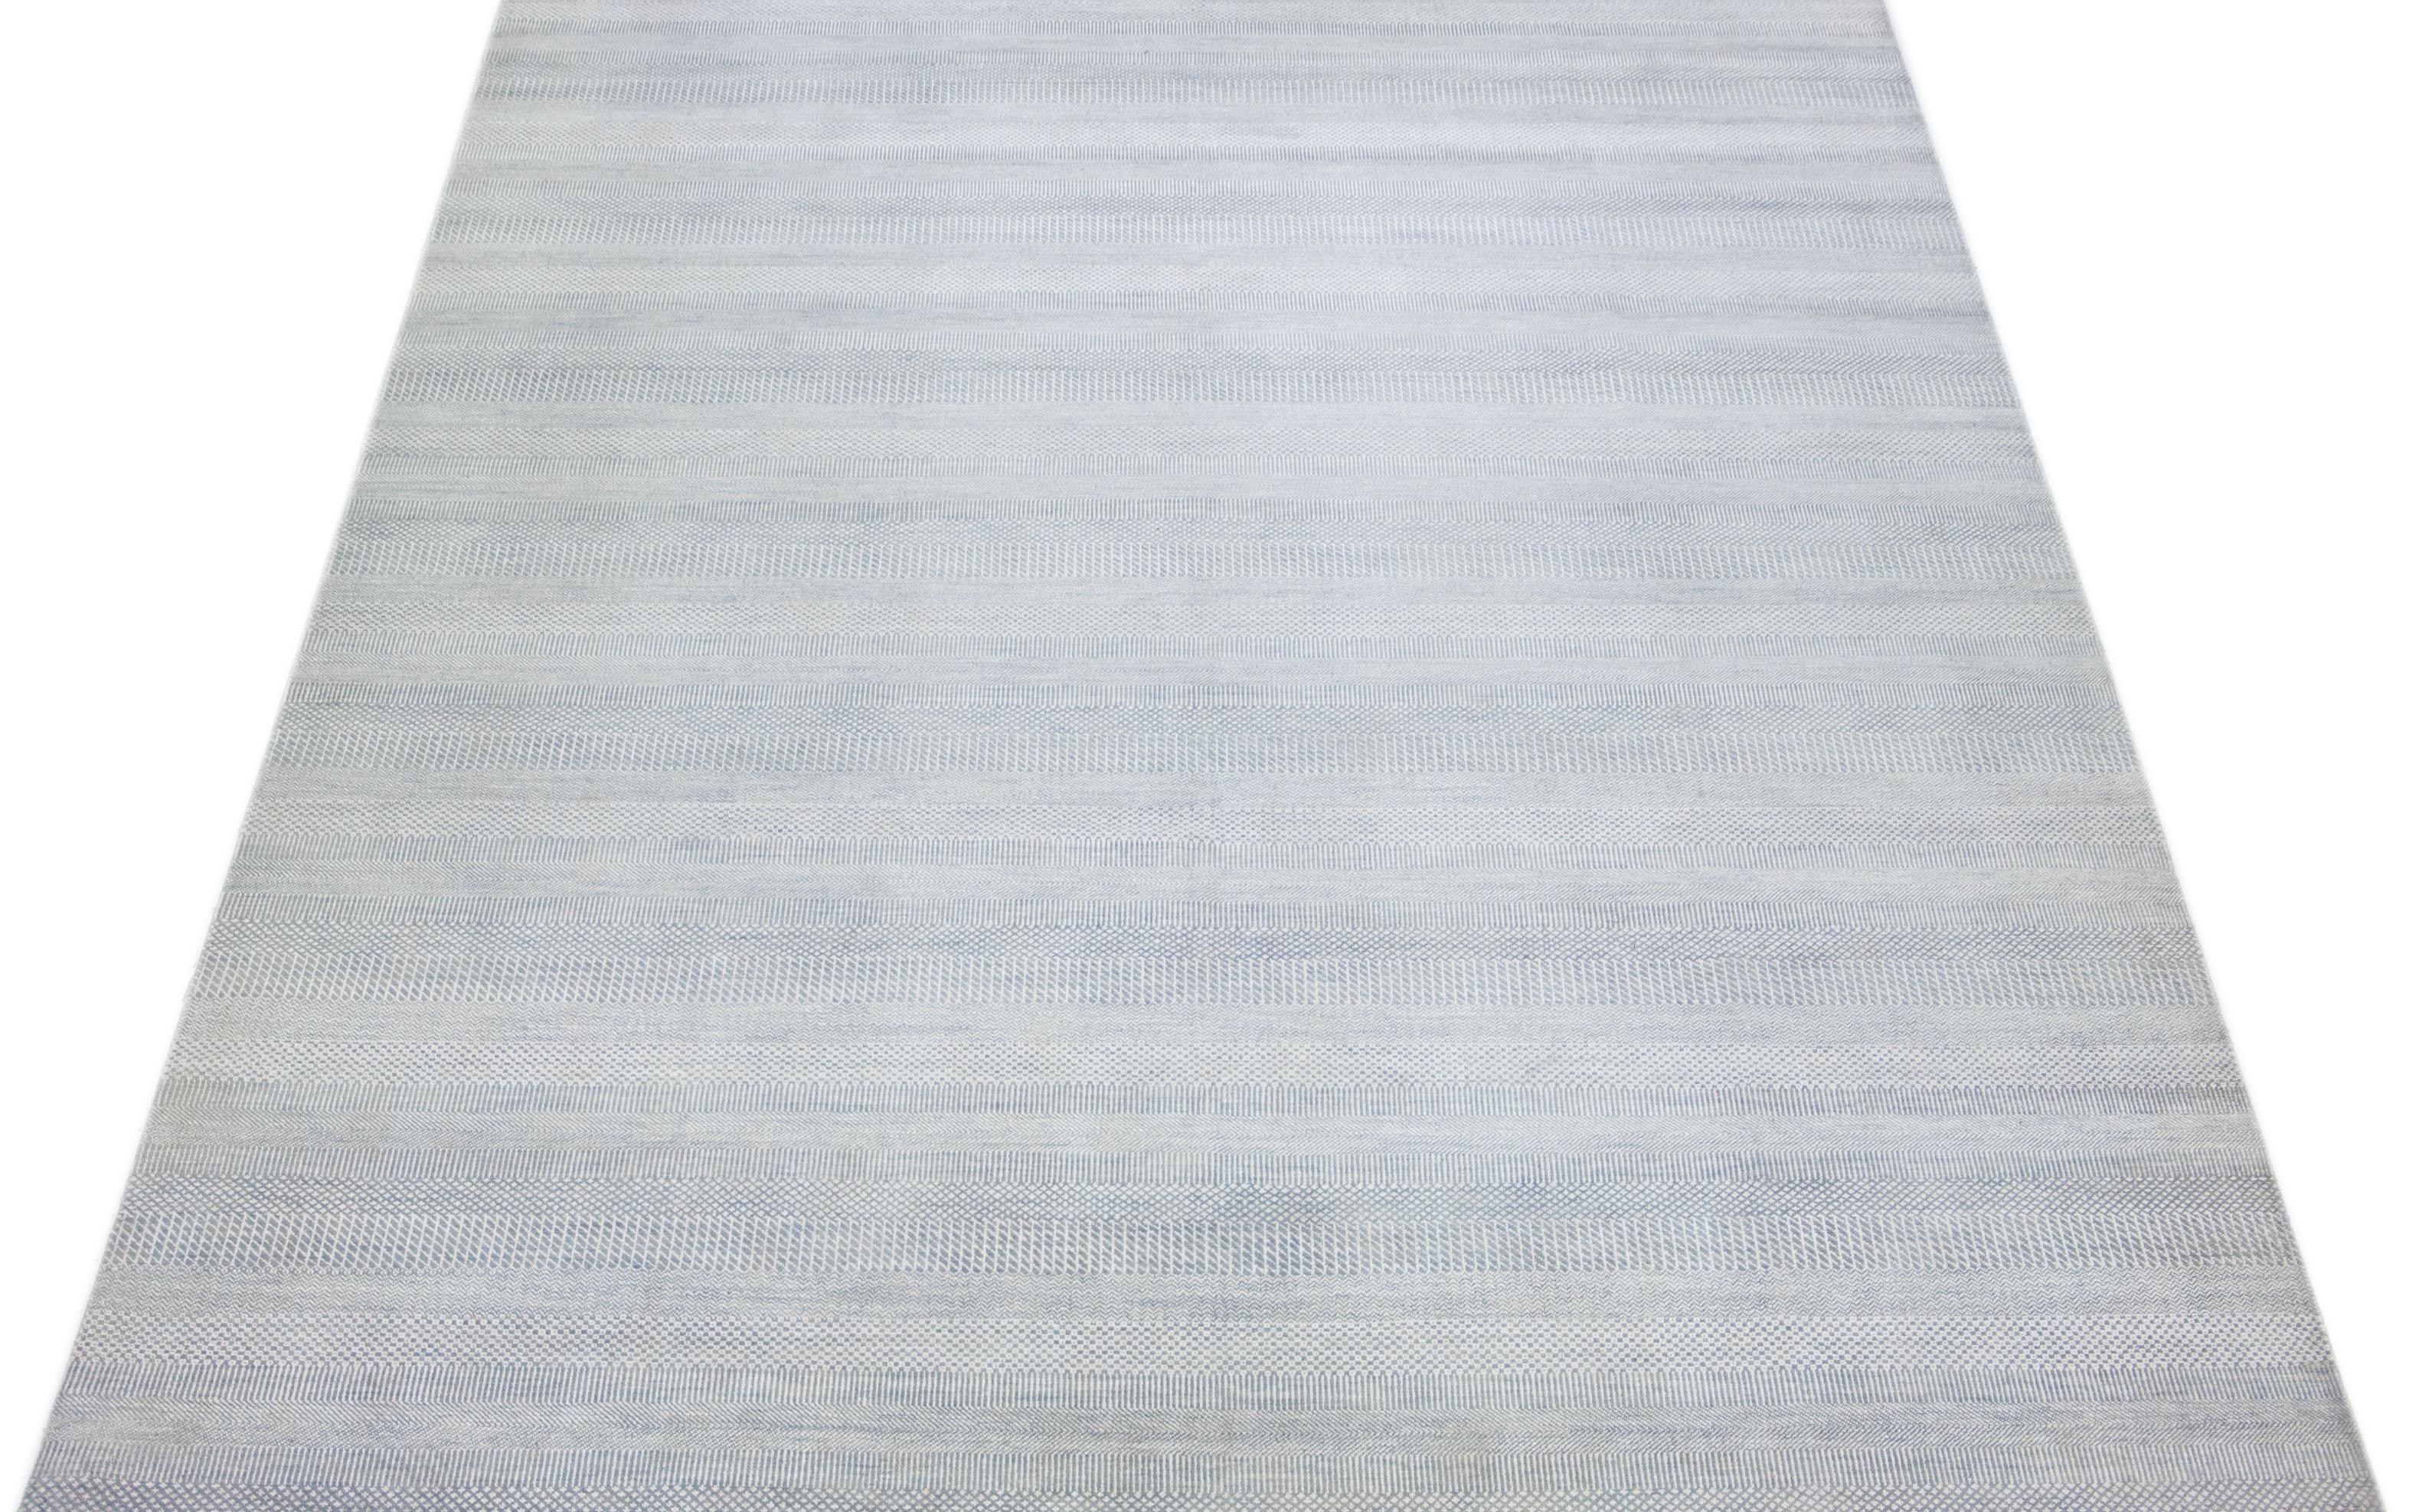 This elegant hand-knotted rug is made of wool. It features a subtle light blue color scheme accented by an all-over geometric pattern—an ideal addition to any contemporary interior.

This rug measures 10' x 13.10